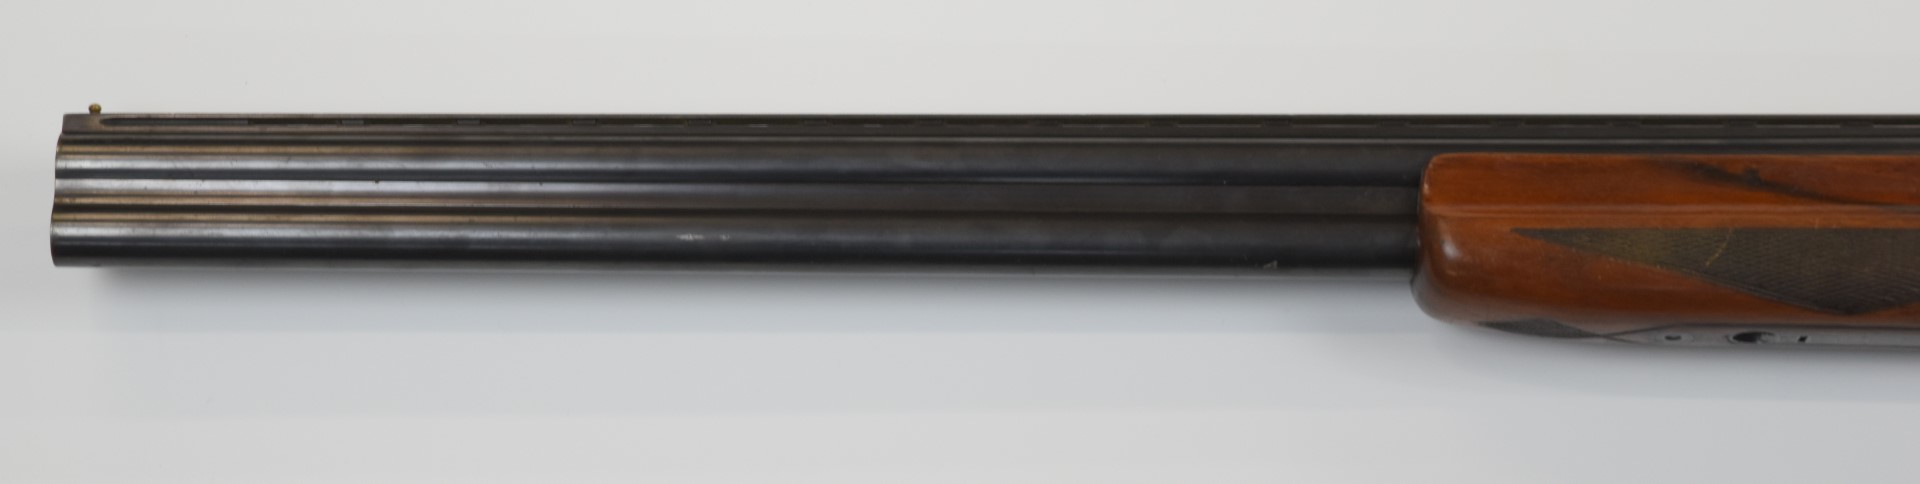 Winchester 101 12 bore over and under ejector shotgun with engraved lock, trigger guard, thumb - Image 10 of 10